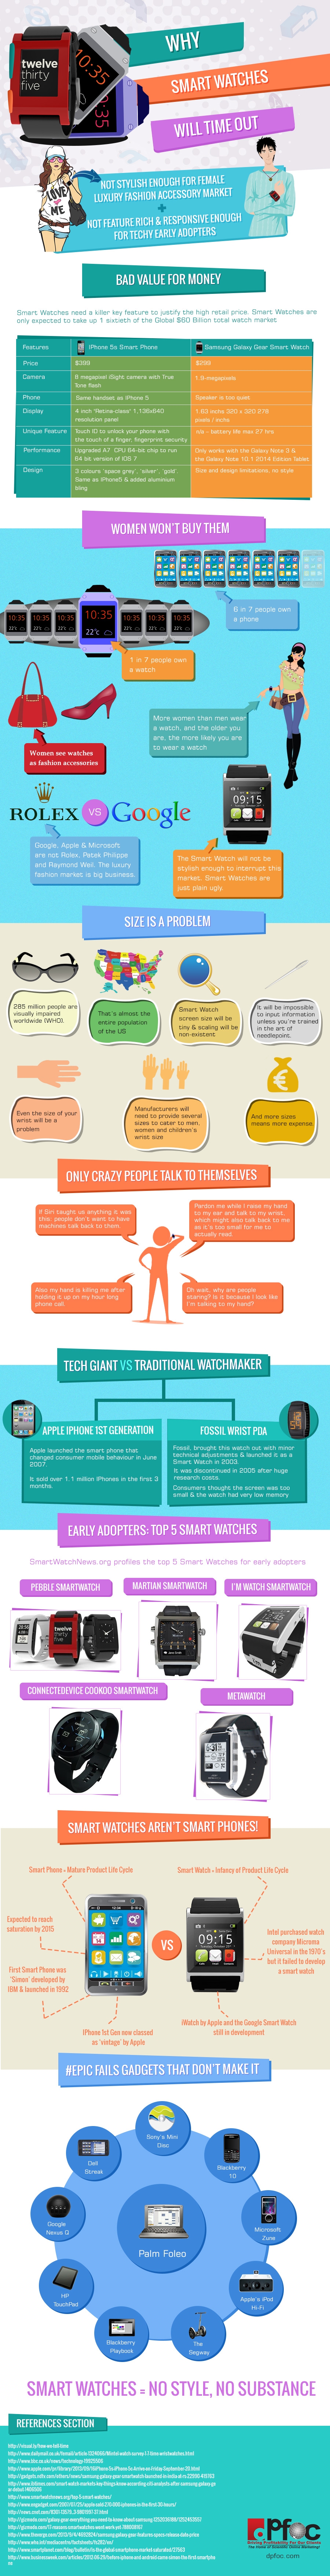 Why Smart Watches Will Time Out Infographic DK